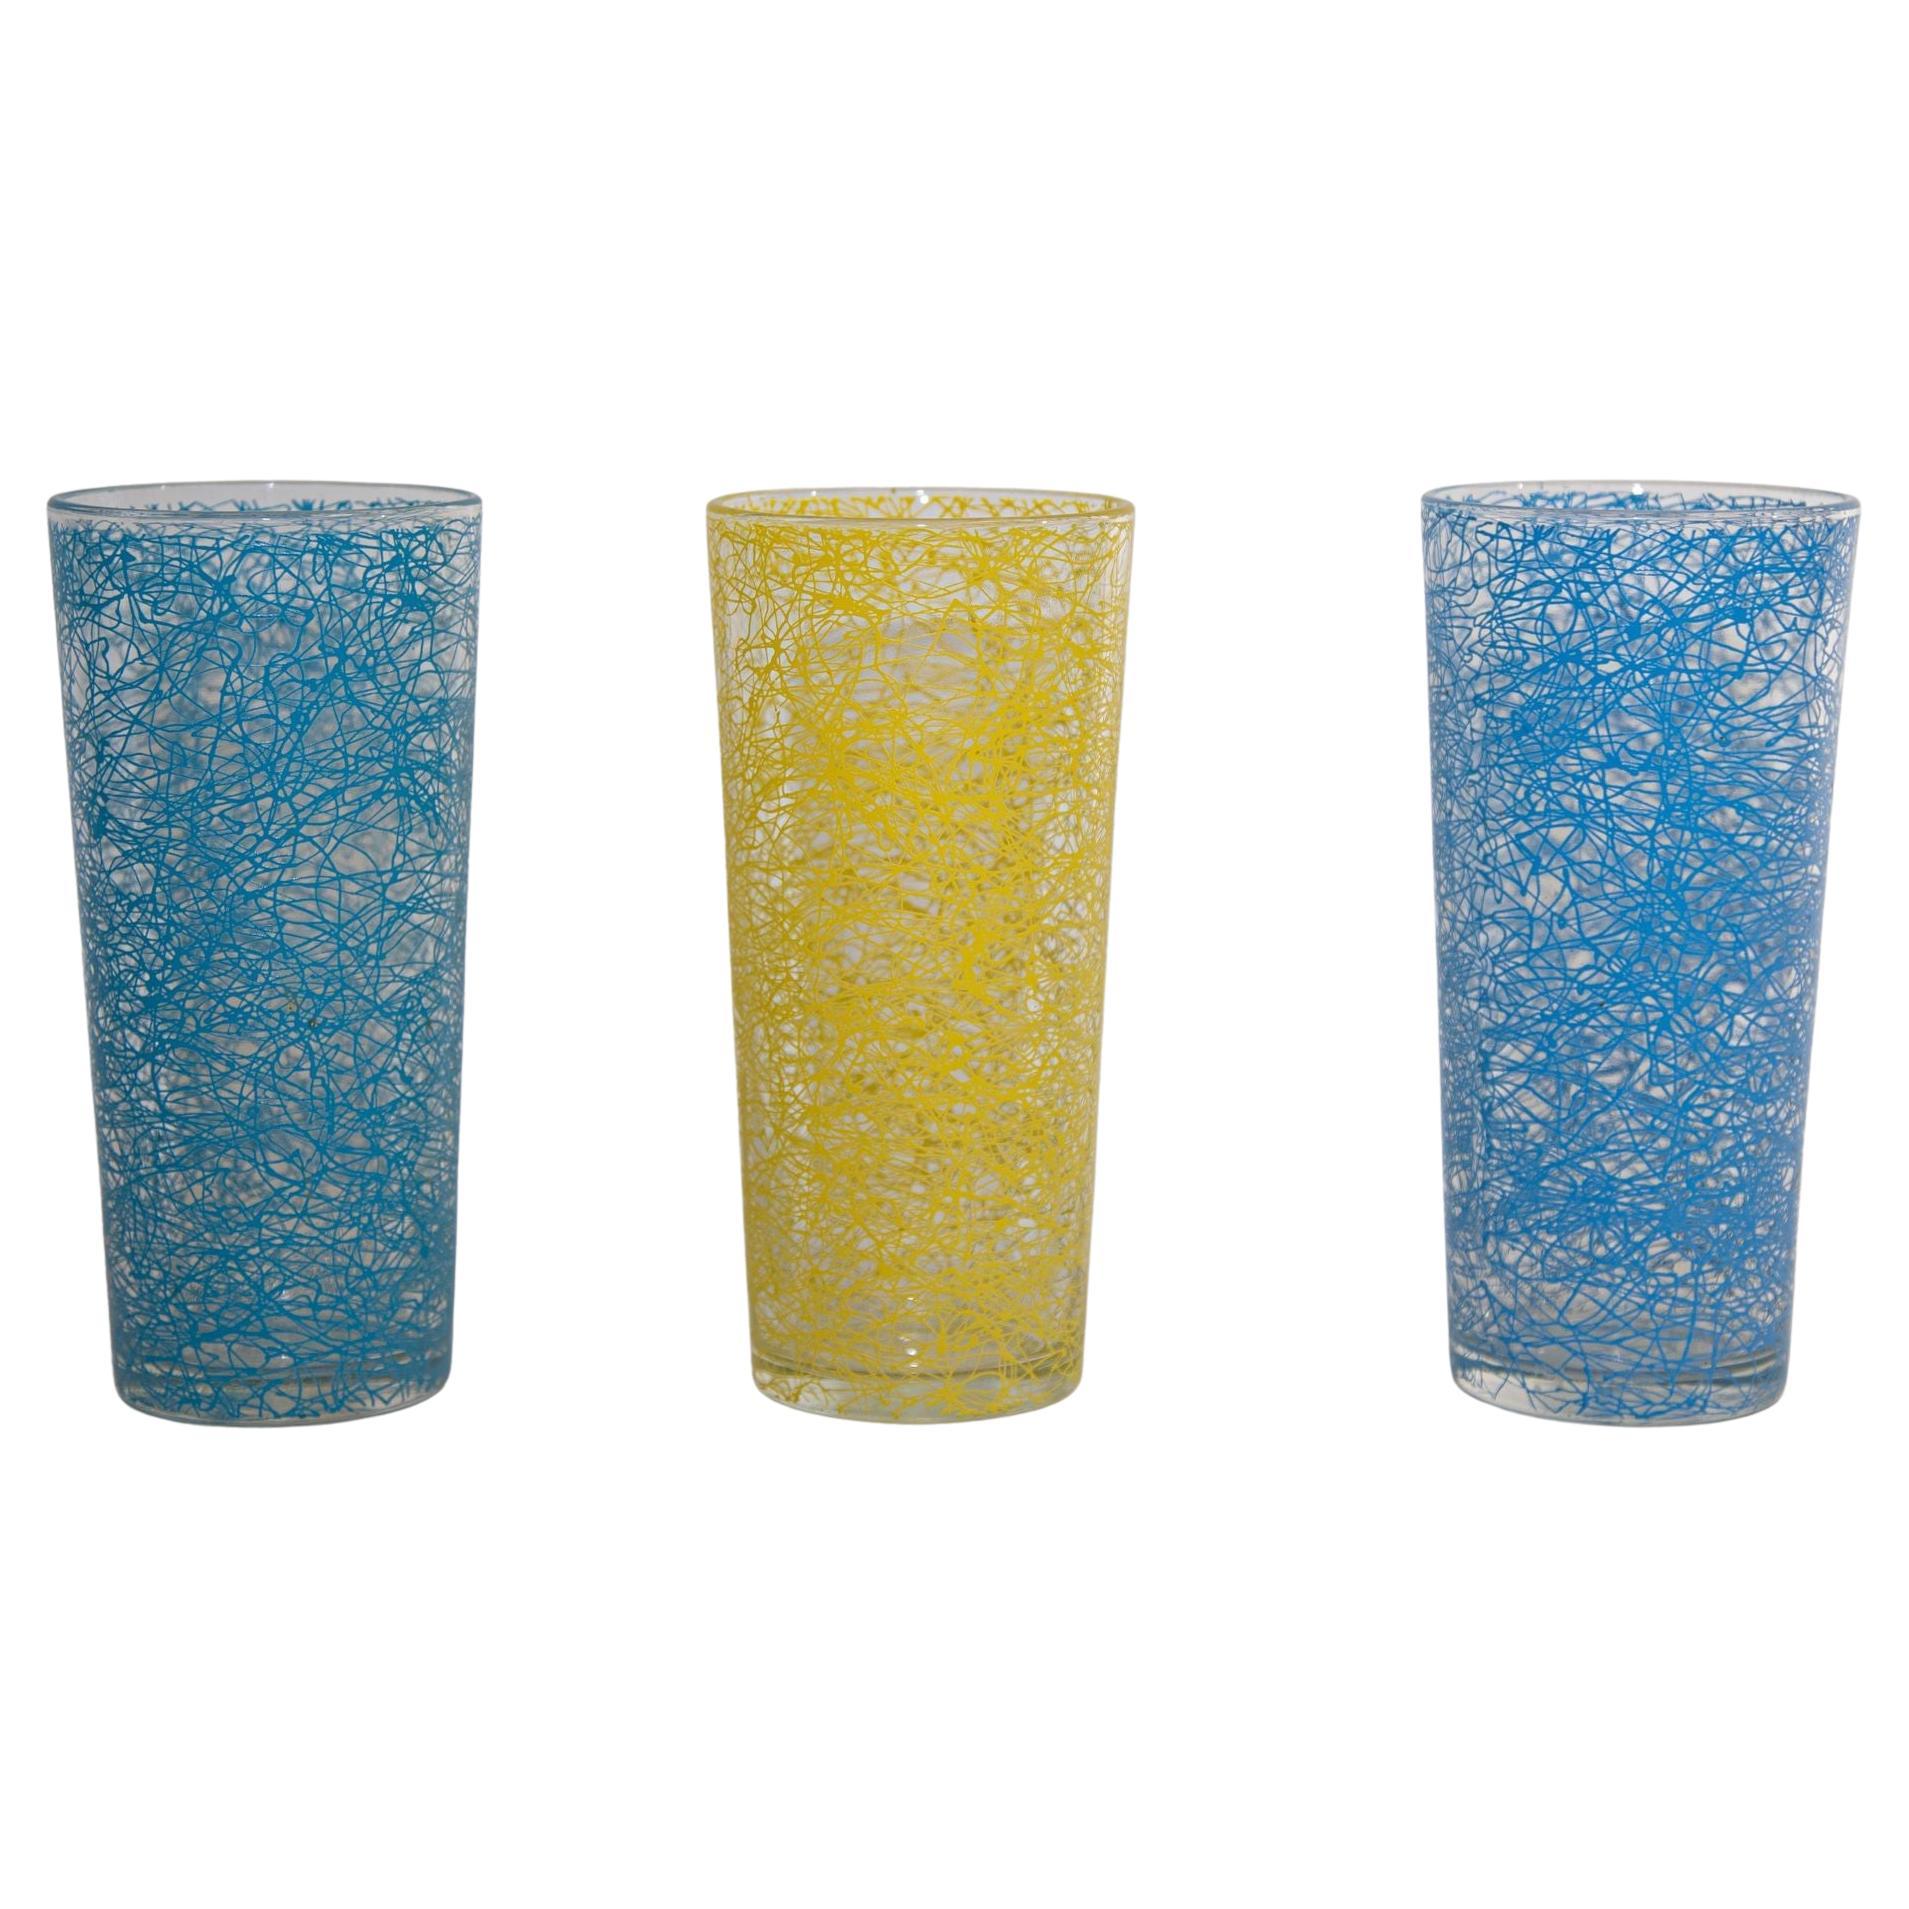 https://a.1stdibscdn.com/vintage-collectible-retro-highball-spaghetti-tumblers-set-of-3-blue-and-yellow-for-sale/f_9068/f_314125021669040966827/f_31412502_1669040967463_bg_processed.jpg